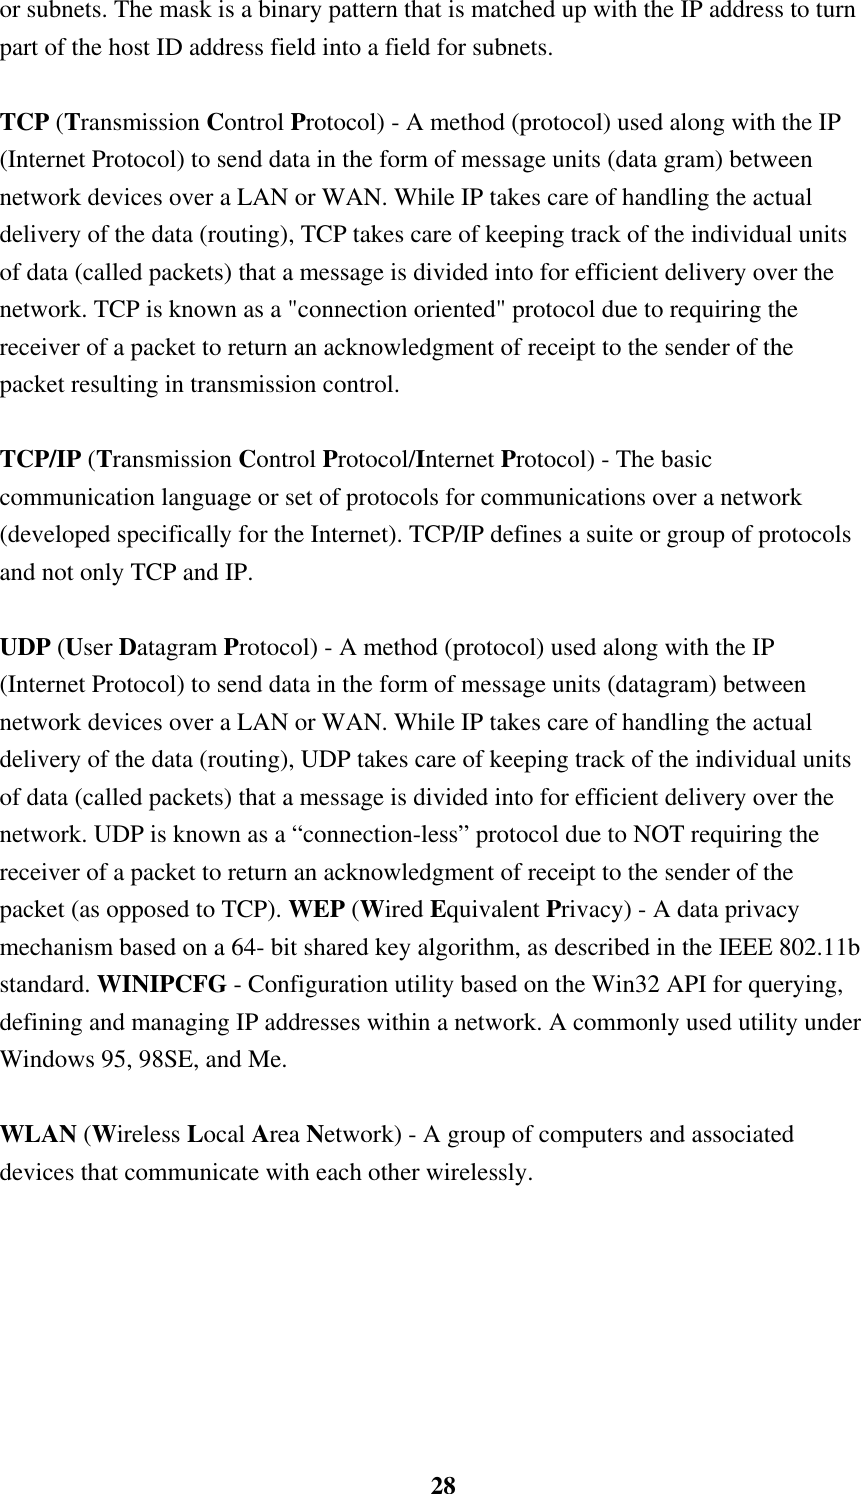    28or subnets. The mask is a binary pattern that is matched up with the IP address to turn part of the host ID address field into a field for subnets.    TCP (Transmission Control Protocol) - A method (protocol) used along with the IP (Internet Protocol) to send data in the form of message units (data gram) between network devices over a LAN or WAN. While IP takes care of handling the actual delivery of the data (routing), TCP takes care of keeping track of the individual units of data (called packets) that a message is divided into for efficient delivery over the network. TCP is known as a &quot;connection oriented&quot; protocol due to requiring the receiver of a packet to return an acknowledgment of receipt to the sender of the packet resulting in transmission control.  TCP/IP (Transmission Control Protocol/Internet Protocol) - The basic communication language or set of protocols for communications over a network (developed specifically for the Internet). TCP/IP defines a suite or group of protocols and not only TCP and IP.  UDP (User Datagram Protocol) - A method (protocol) used along with the IP (Internet Protocol) to send data in the form of message units (datagram) between network devices over a LAN or WAN. While IP takes care of handling the actual delivery of the data (routing), UDP takes care of keeping track of the individual units of data (called packets) that a message is divided into for efficient delivery over the network. UDP is known as a “connection-less” protocol due to NOT requiring the receiver of a packet to return an acknowledgment of receipt to the sender of the packet (as opposed to TCP). WEP (Wired Equivalent Privacy) - A data privacy mechanism based on a 64- bit shared key algorithm, as described in the IEEE 802.11b standard. WINIPCFG - Configuration utility based on the Win32 API for querying, defining and managing IP addresses within a network. A commonly used utility under Windows 95, 98SE, and Me.  WLAN (Wireless Local Area Network) - A group of computers and associated devices that communicate with each other wirelessly.   